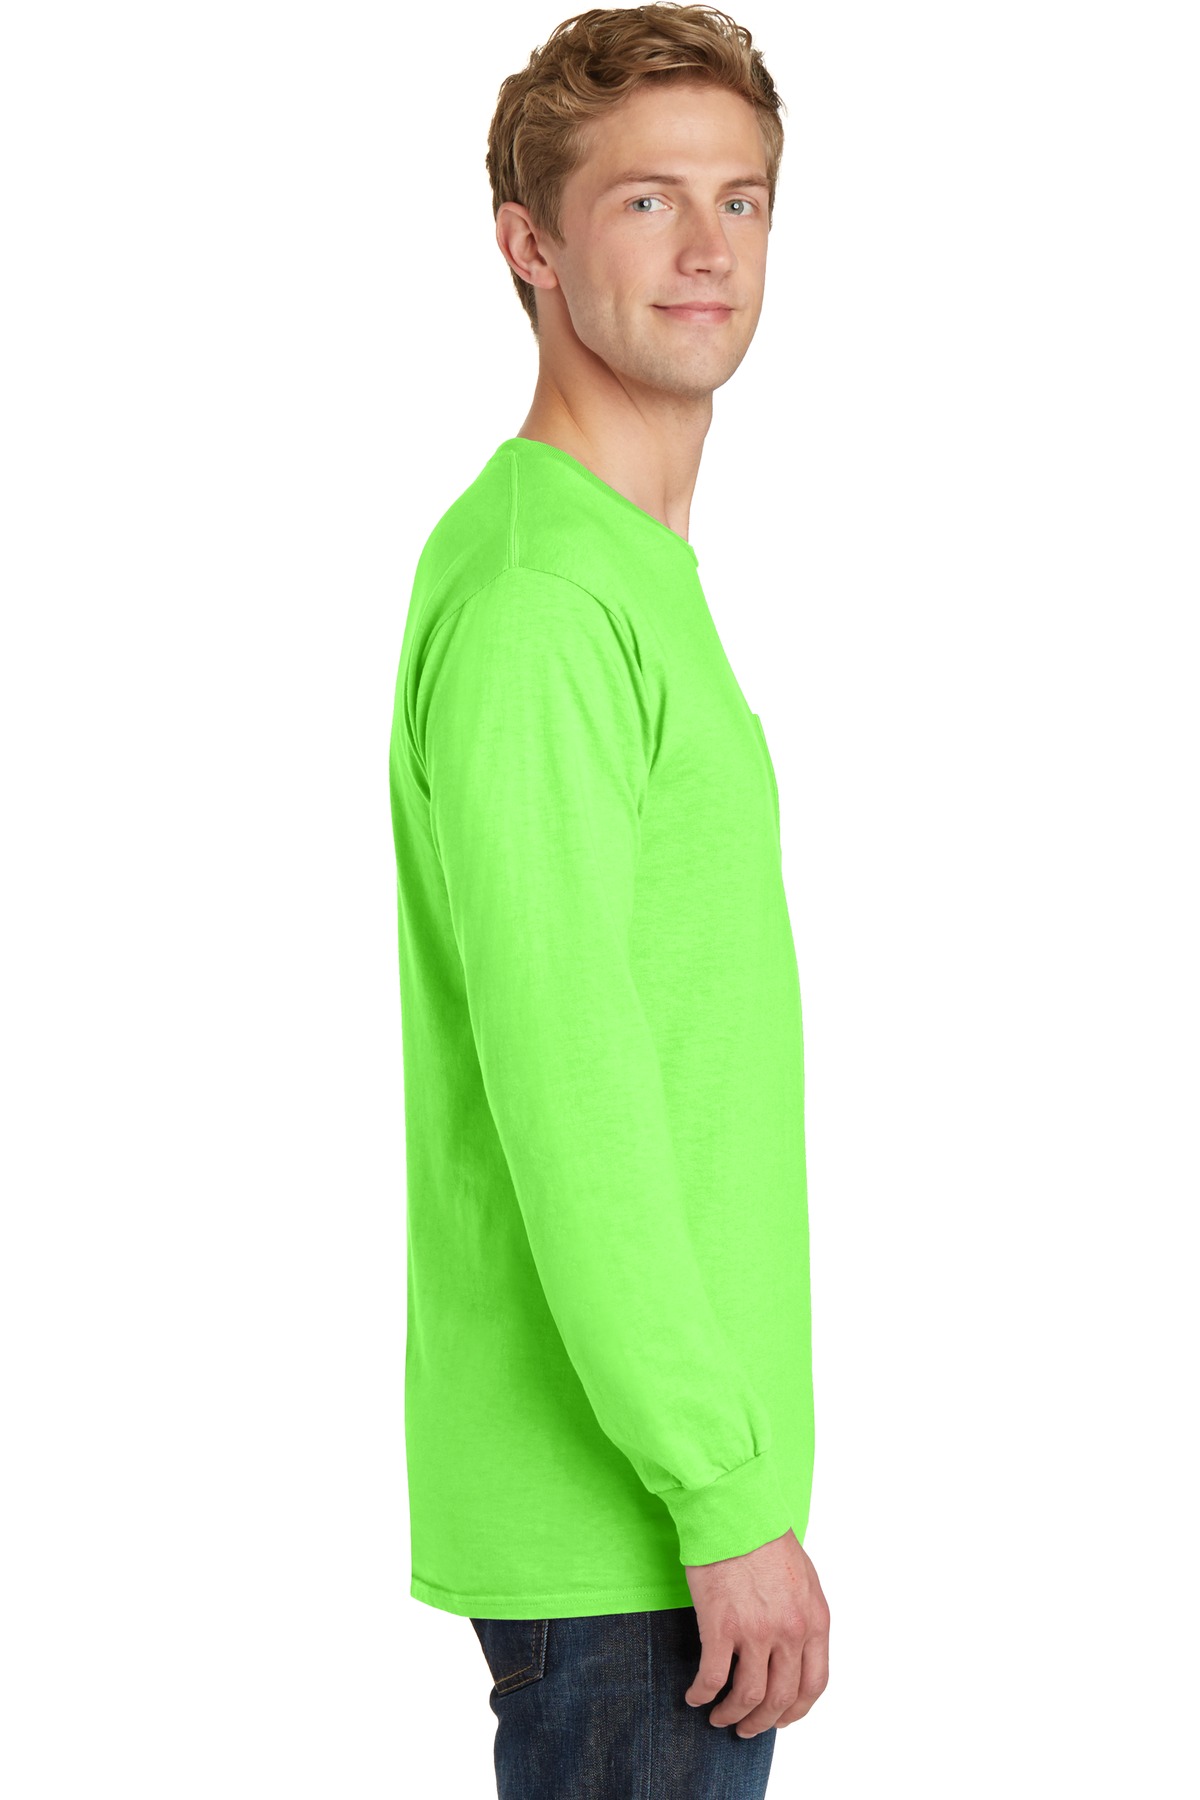 Port & Company Pigment Dyed Long Sleeve Pocket Tee-M (Neon Green) - image 3 of 6